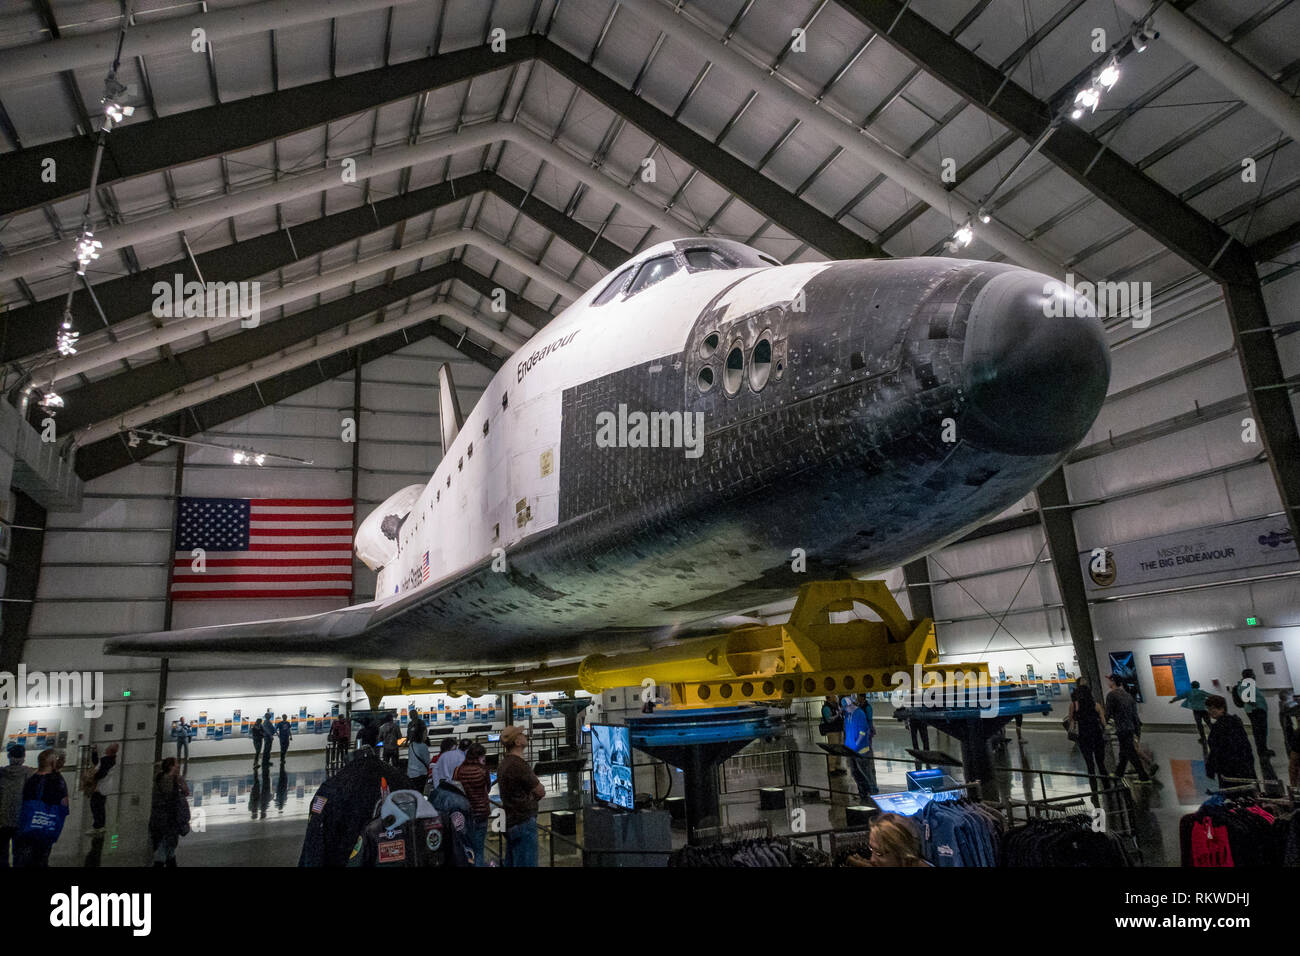 https://c8.alamy.com/comp/RKWDHJ/endeavour-space-shuttle-inside-its-hanger-at-the-california-science-center-in-los-angeles-RKWDHJ.jpg